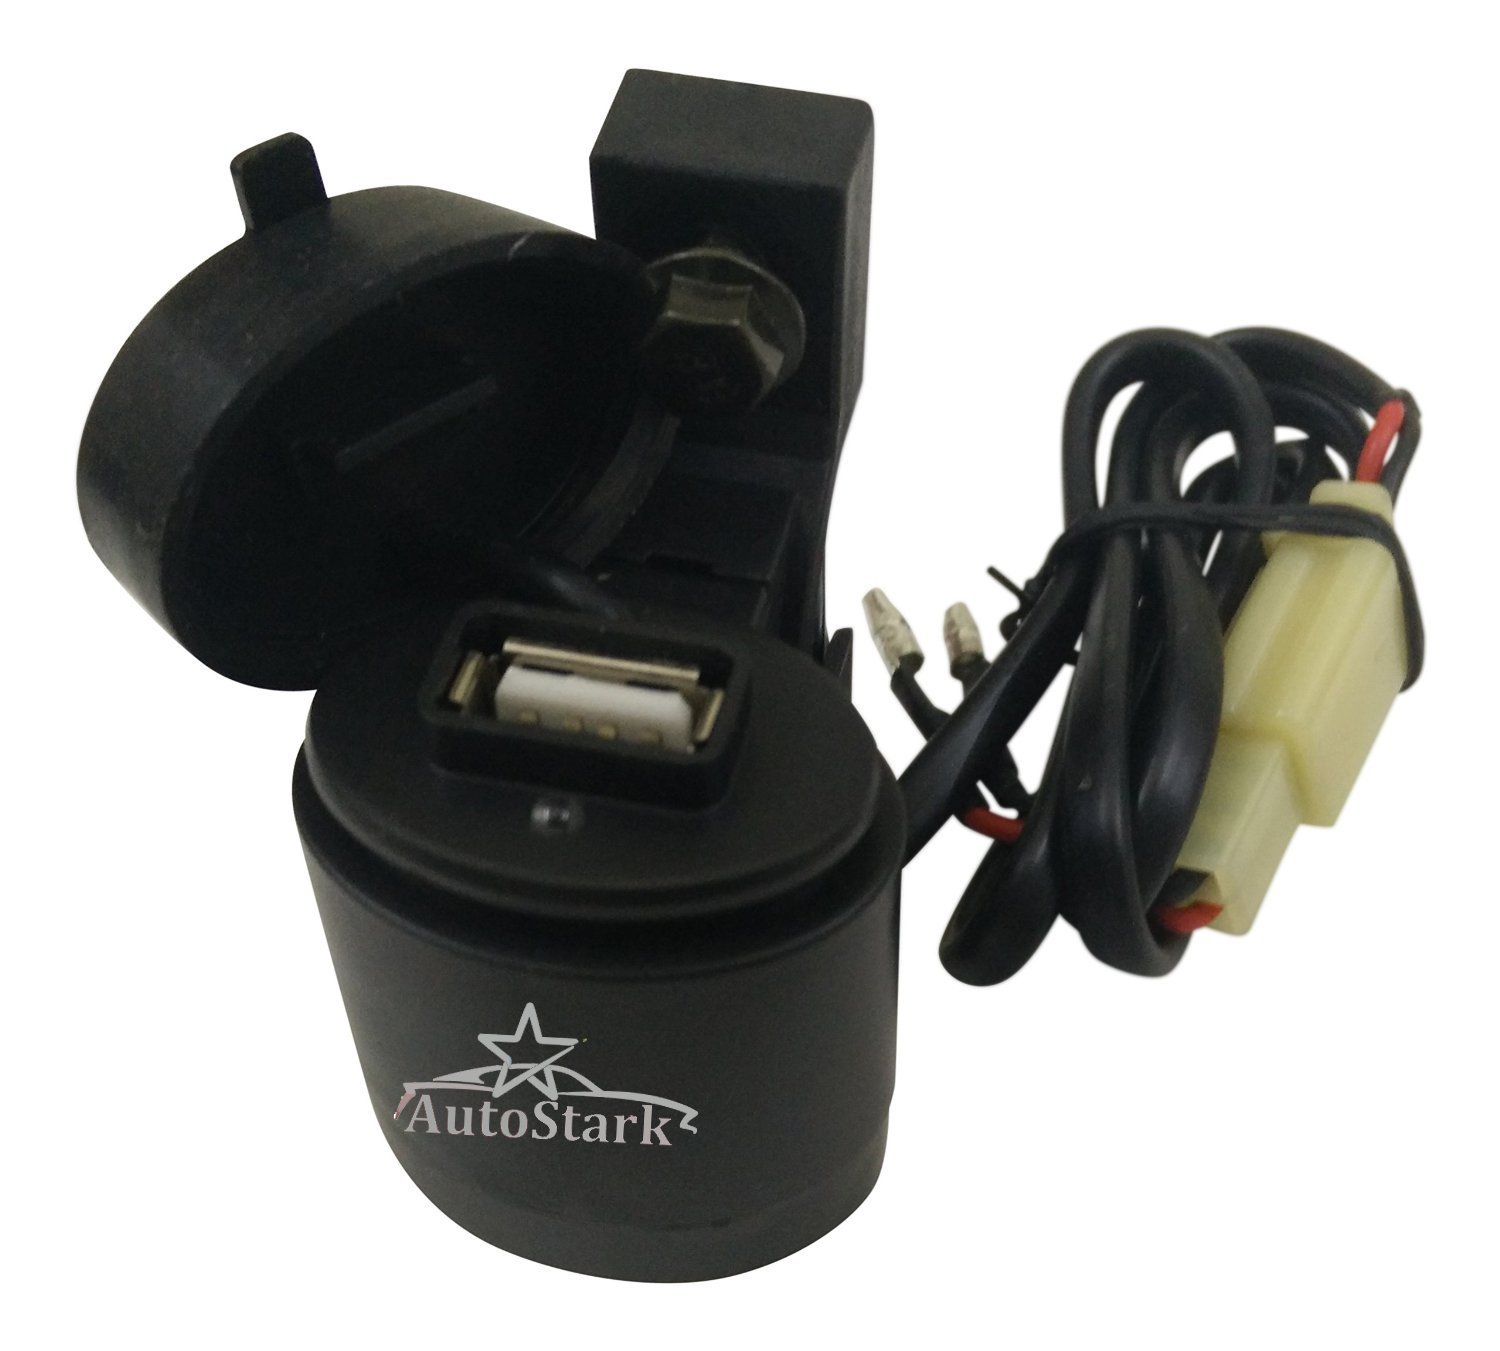 AutoStark Motorcycle/Bike USB Mobile Charger for Bajaj Pulsar 200 NS DTS-I Price in India